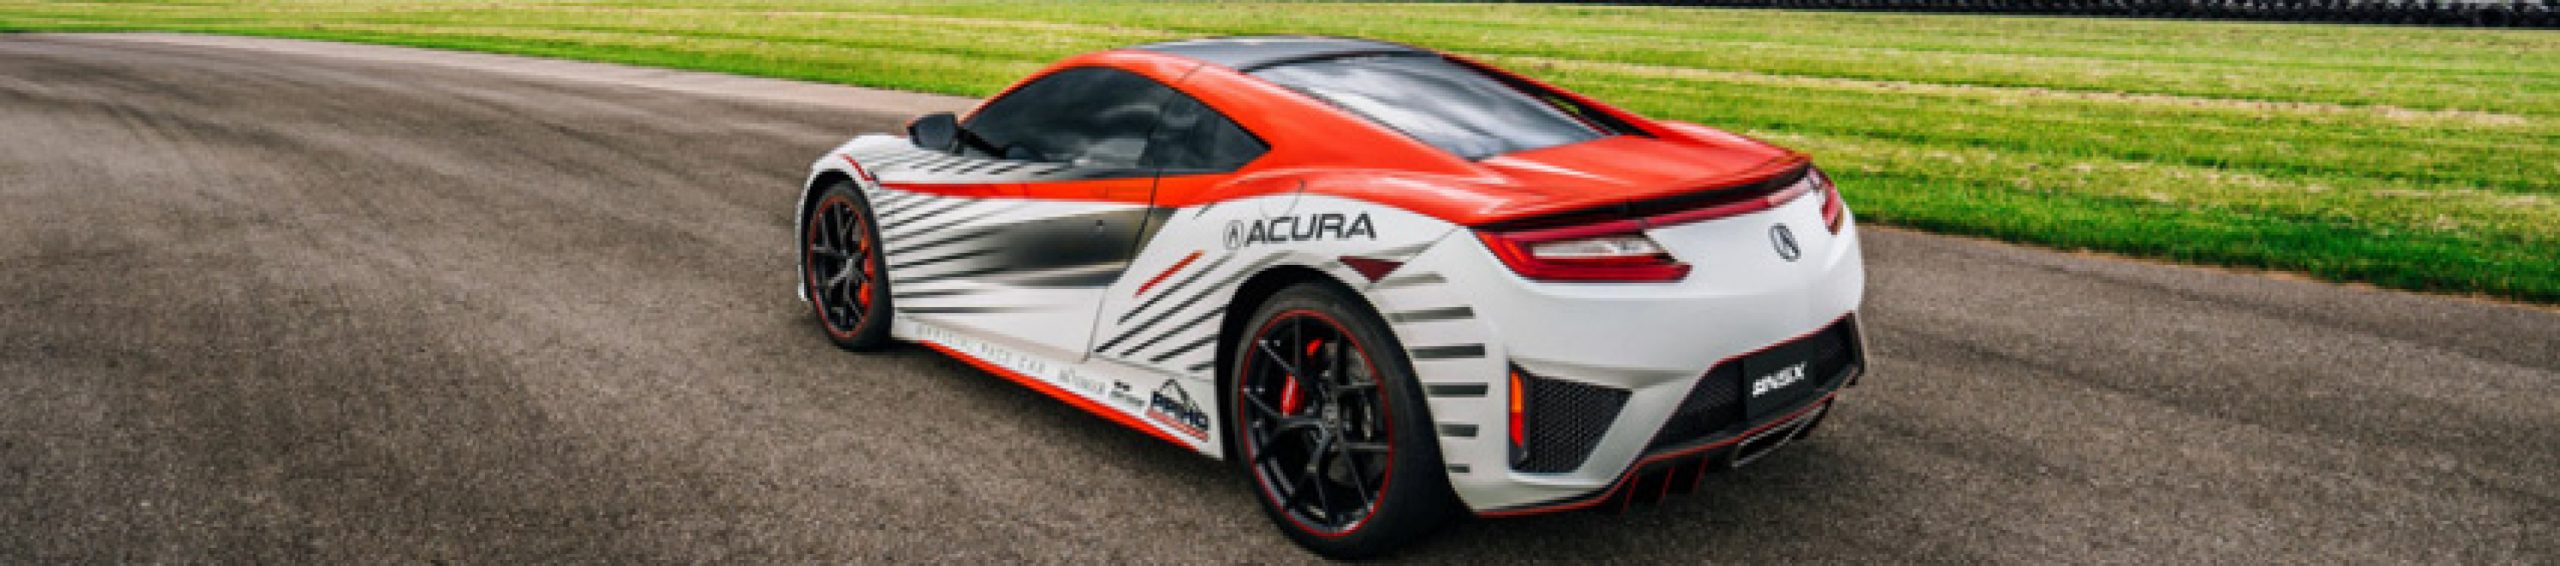 acura, autos, cars, acura nsx, acura nsx next-gen sports vehicle will be a pace car at pikes peak